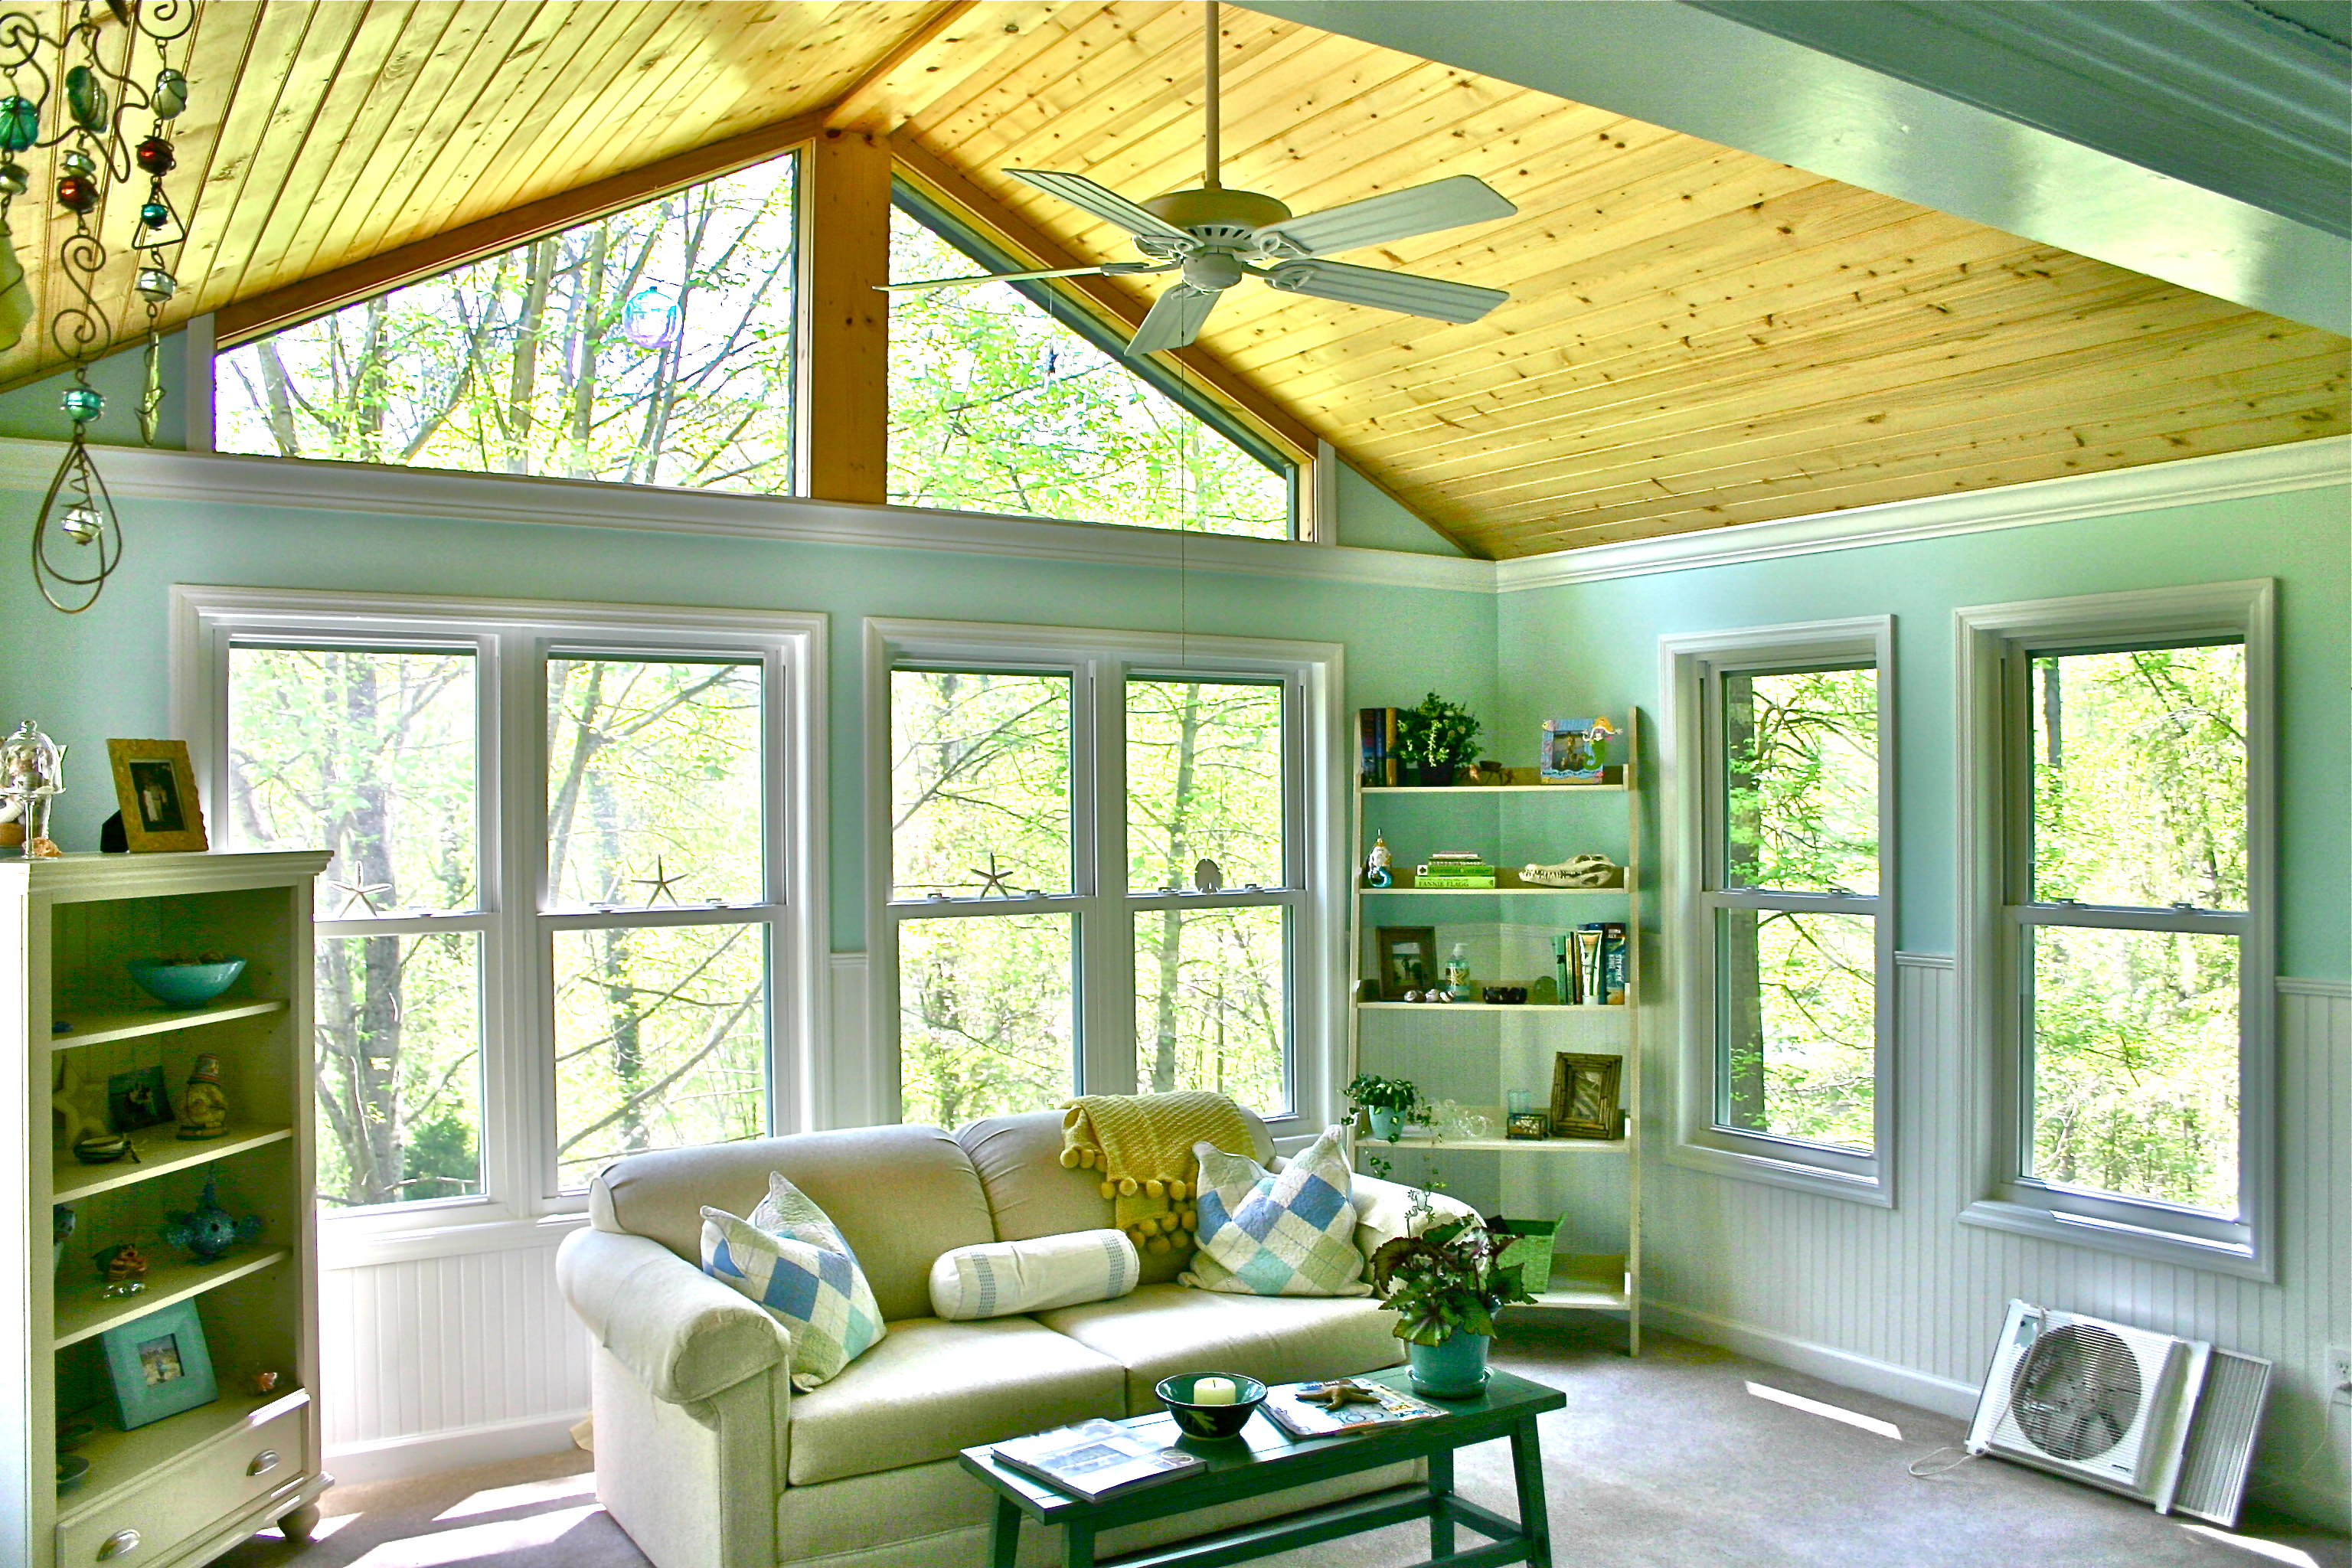 Bring The Outdoors Inside With Sunrooms